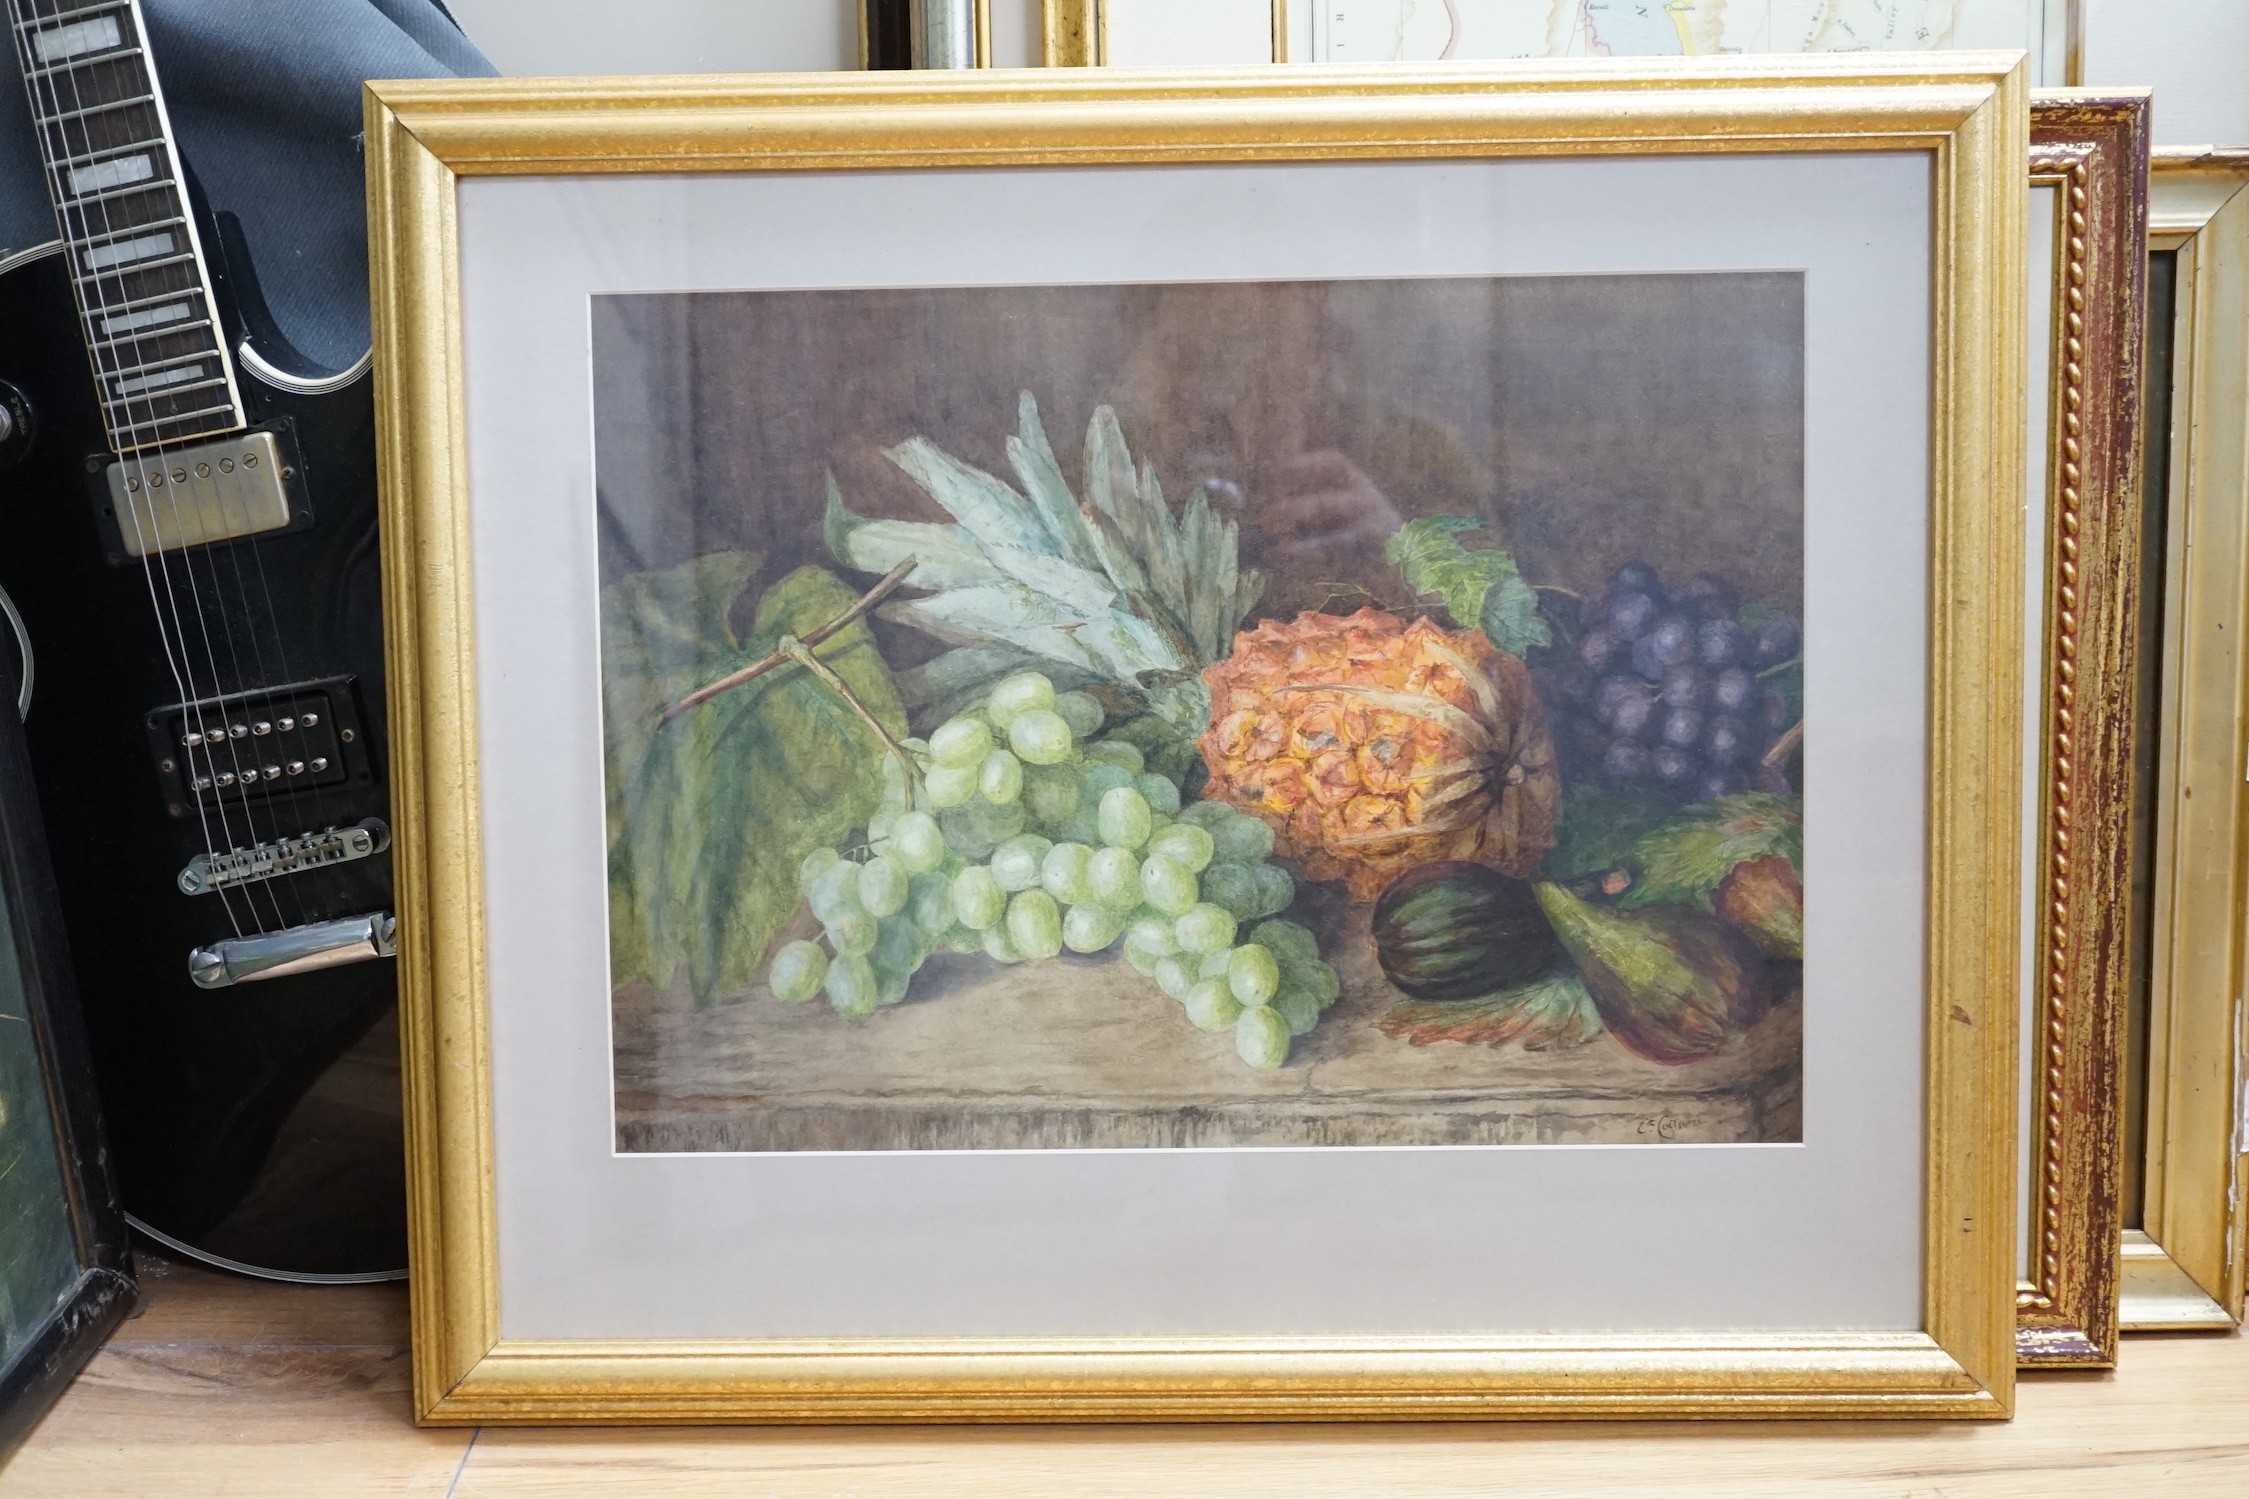 Parker Hagarty (1854-1934), watercolour, River landscape, signed, 25 x 34cm, and two watercolours, a still life of fruit and a study of doves by Edith Cottam (Exh.1886-1892), signed and dated 1892, 32 x 46cm